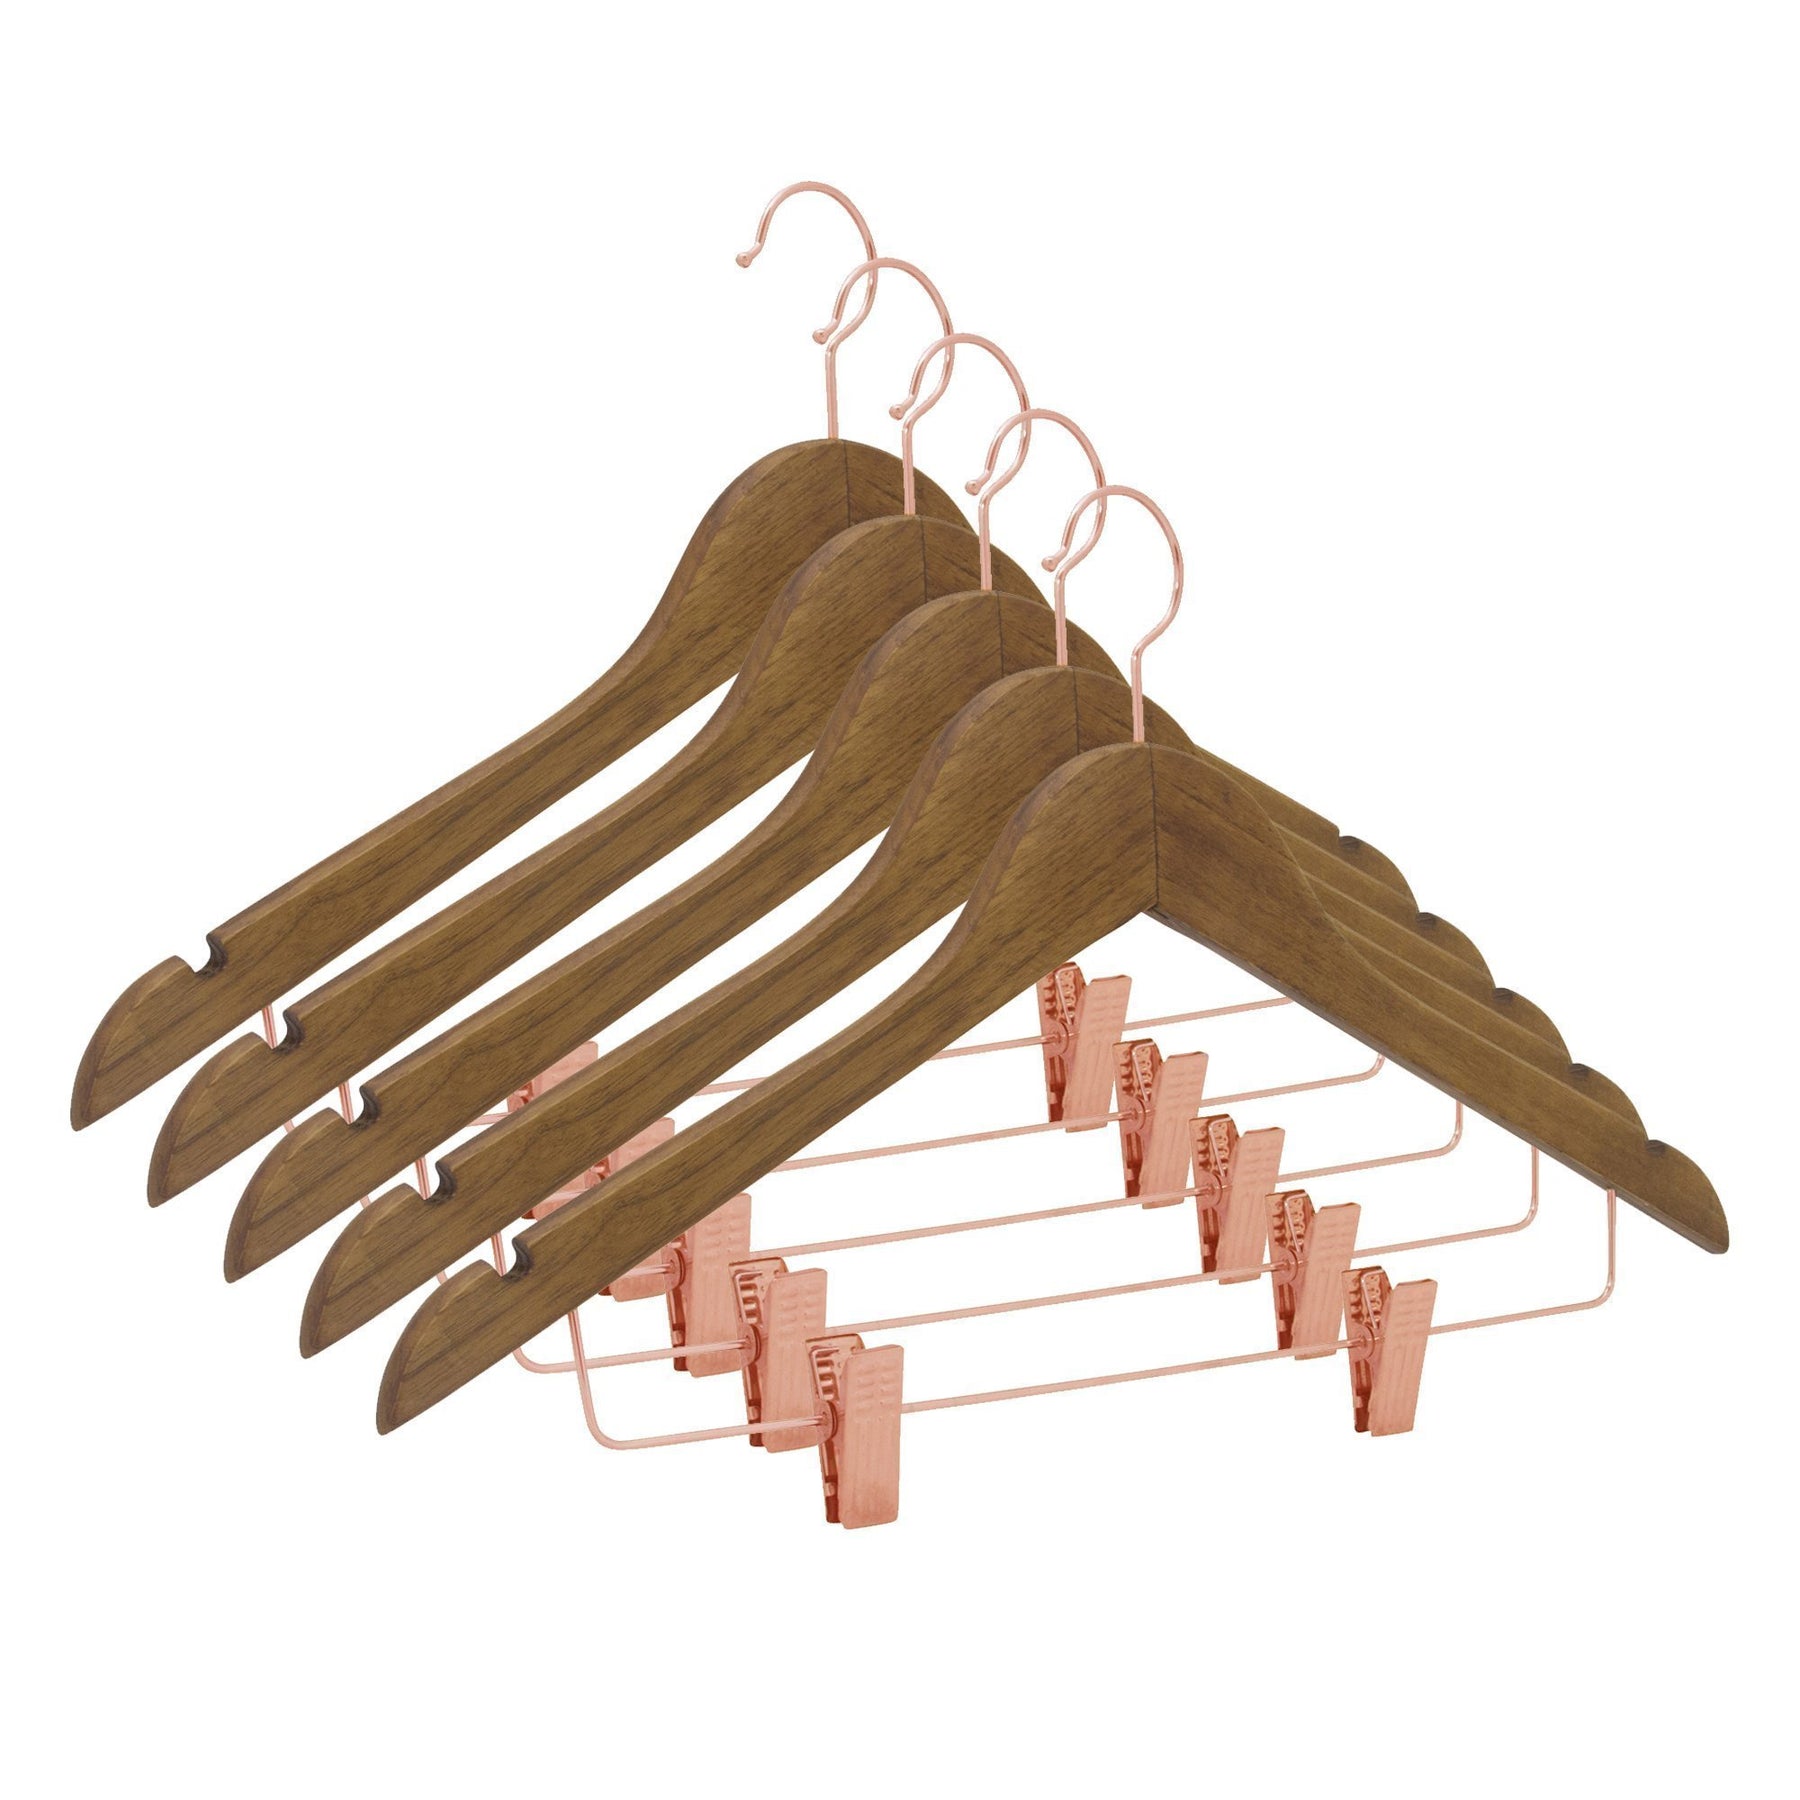 https://cdn.shopify.com/s/files/1/2993/5404/products/closet-complete-wood-hangers-premium-wooden-suits-pants-skirt-hangers-with-clips-79632-7162161659989_1800x1800.jpg?v=1552520136